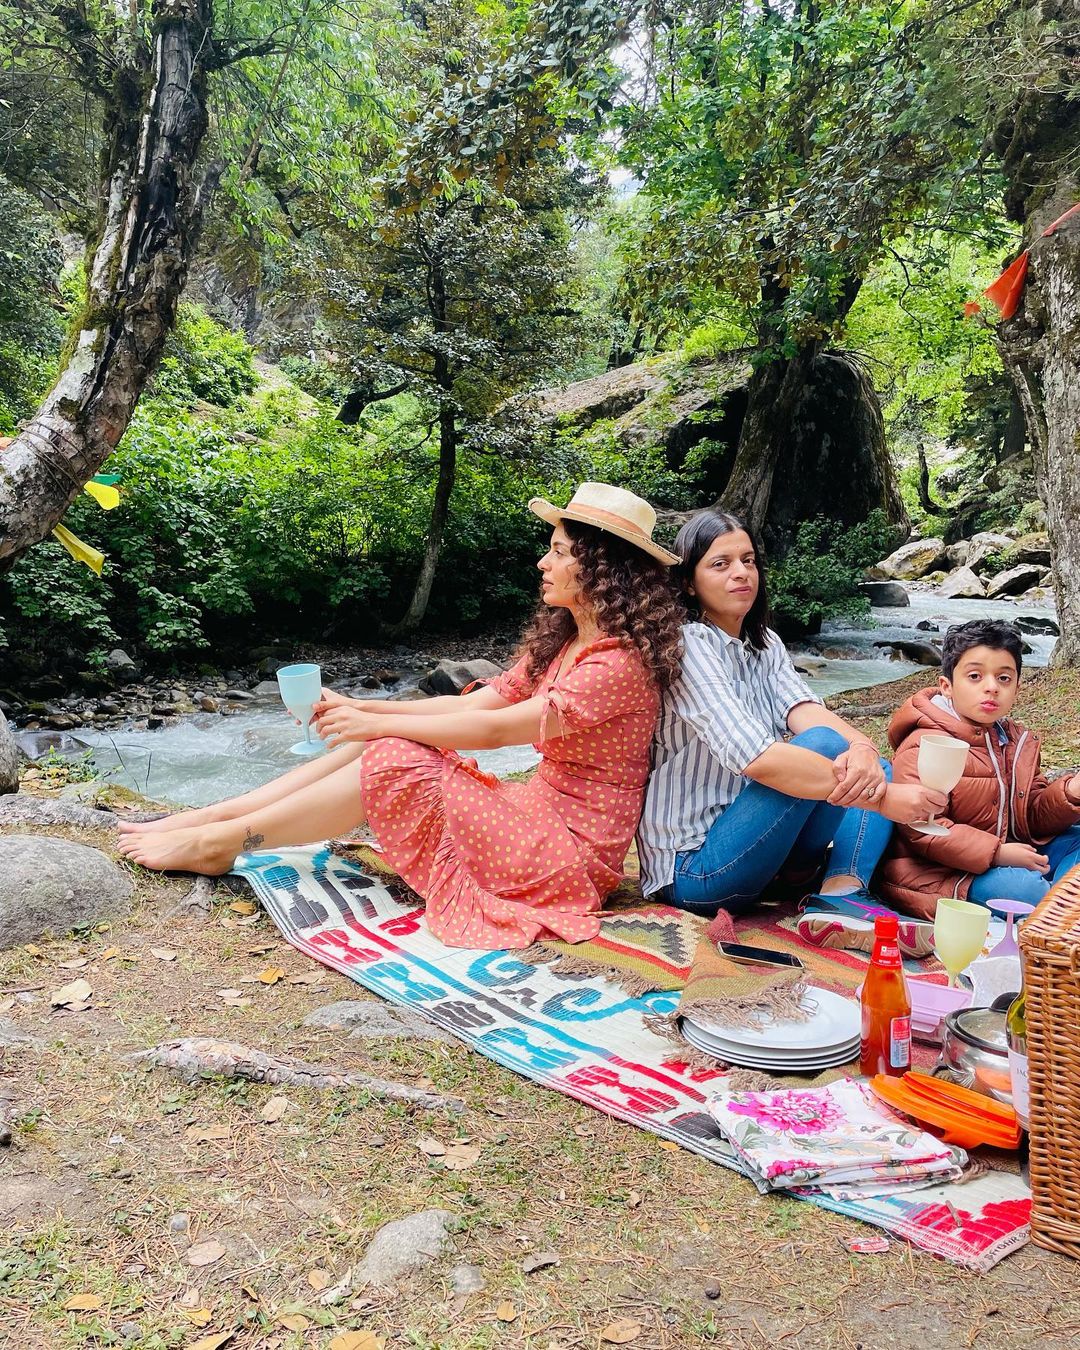 Kangana Ranaut gives compnay to her sister and nephew during the family picnic.